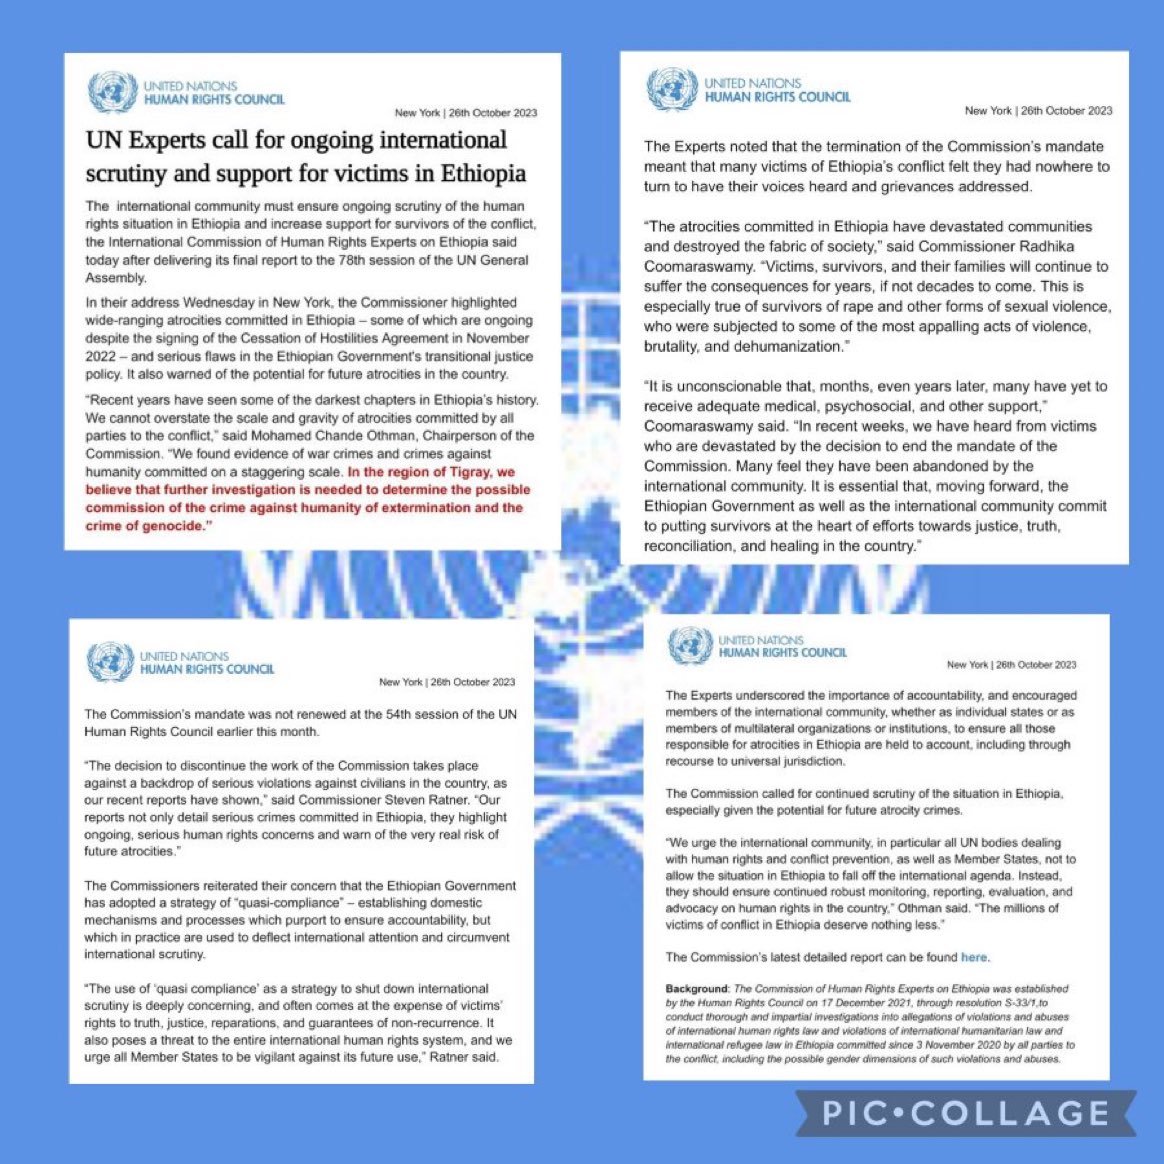 The ICHREE delivered its final report to the 78th session of Z UN General Assembly. highlighted wide-ranging atrocities committed in🇪🇹 -even after Z Pretoria Agreement in Nov 2022. @matteorenzi @UN @alexanderdecroo Seek to press 🇪🇹 to #UpholdThePretoriaAgreement @Rahiel_h